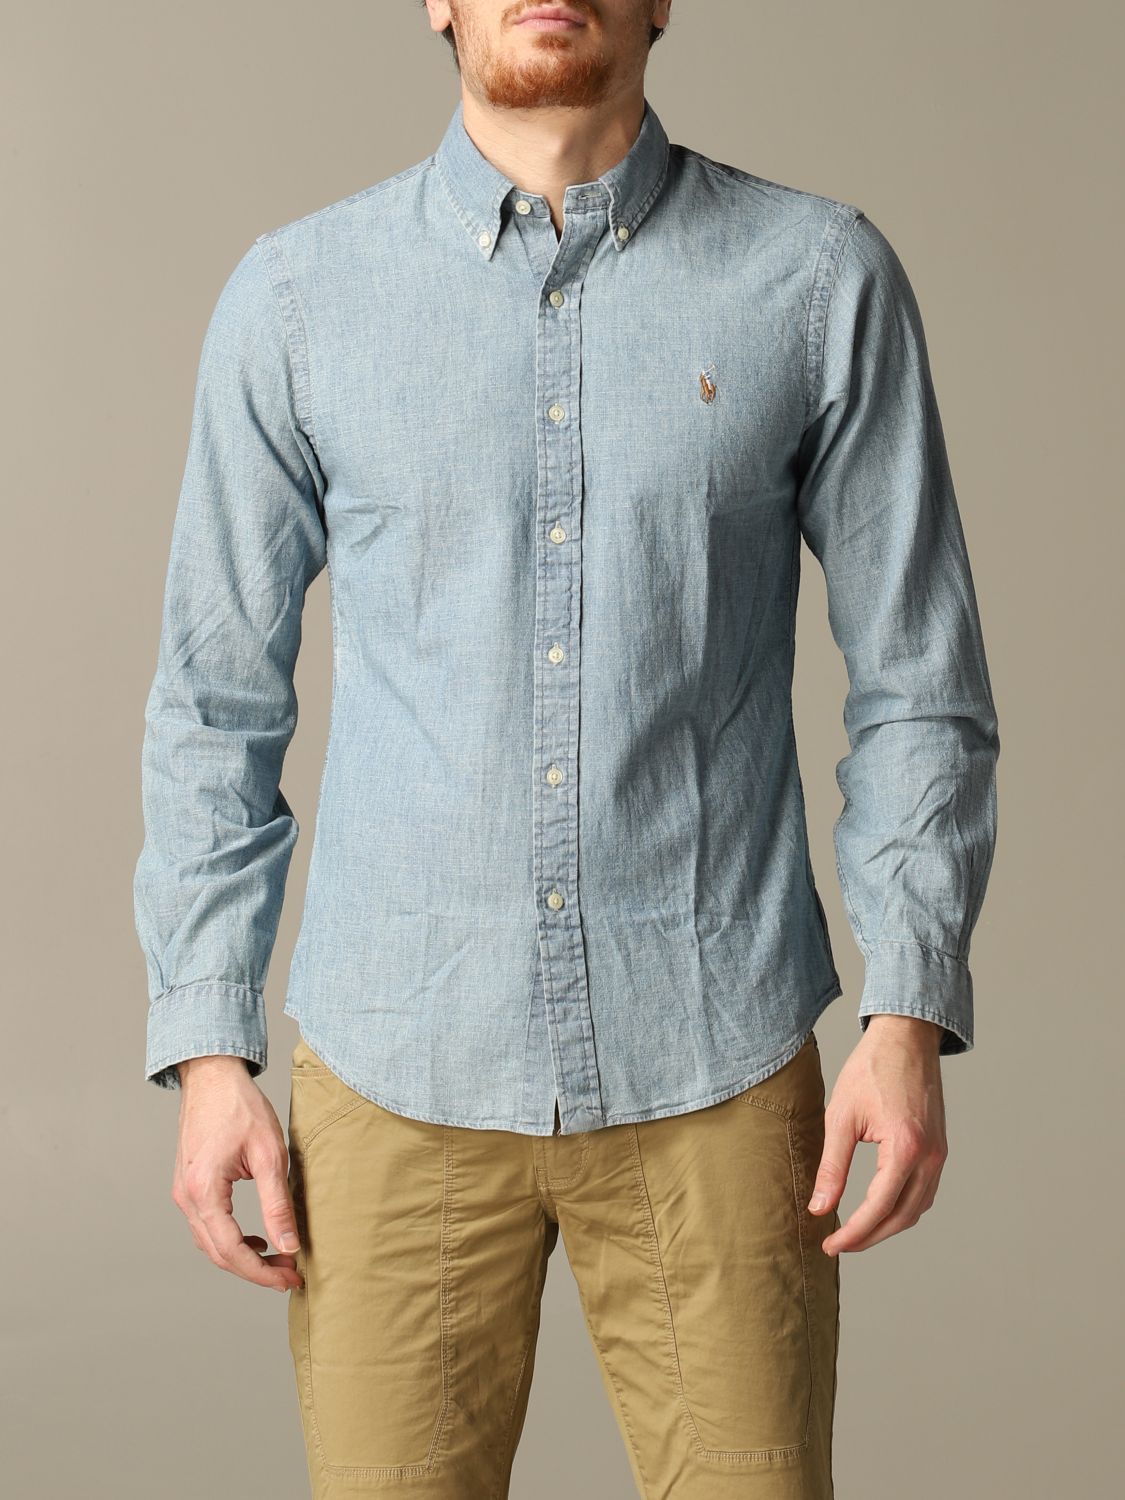 hun Oorlogsschip Het strand Polo Ralph Lauren Outlet: chambray slim fit shirt - Stone Washed | Polo Ralph  Lauren shirt 710548538 online on GIGLIO.COM